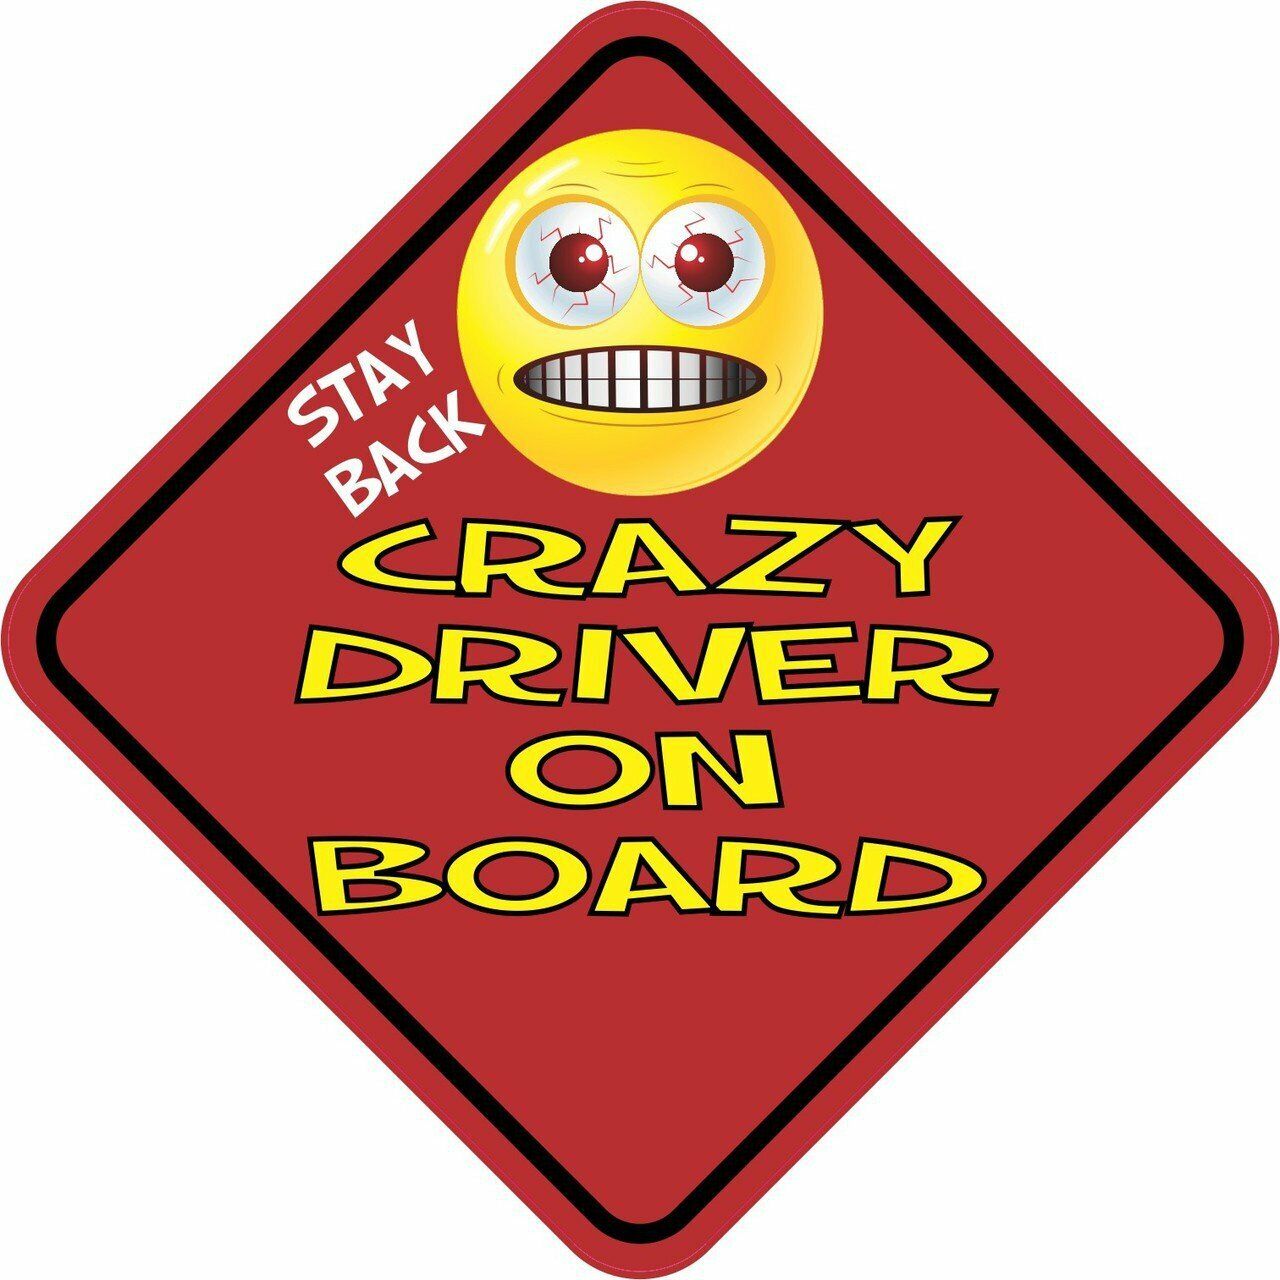 5in x 5in Stay Back Crazy Driver On Board Magnet Car Truck Vehicle Magnetic Sign